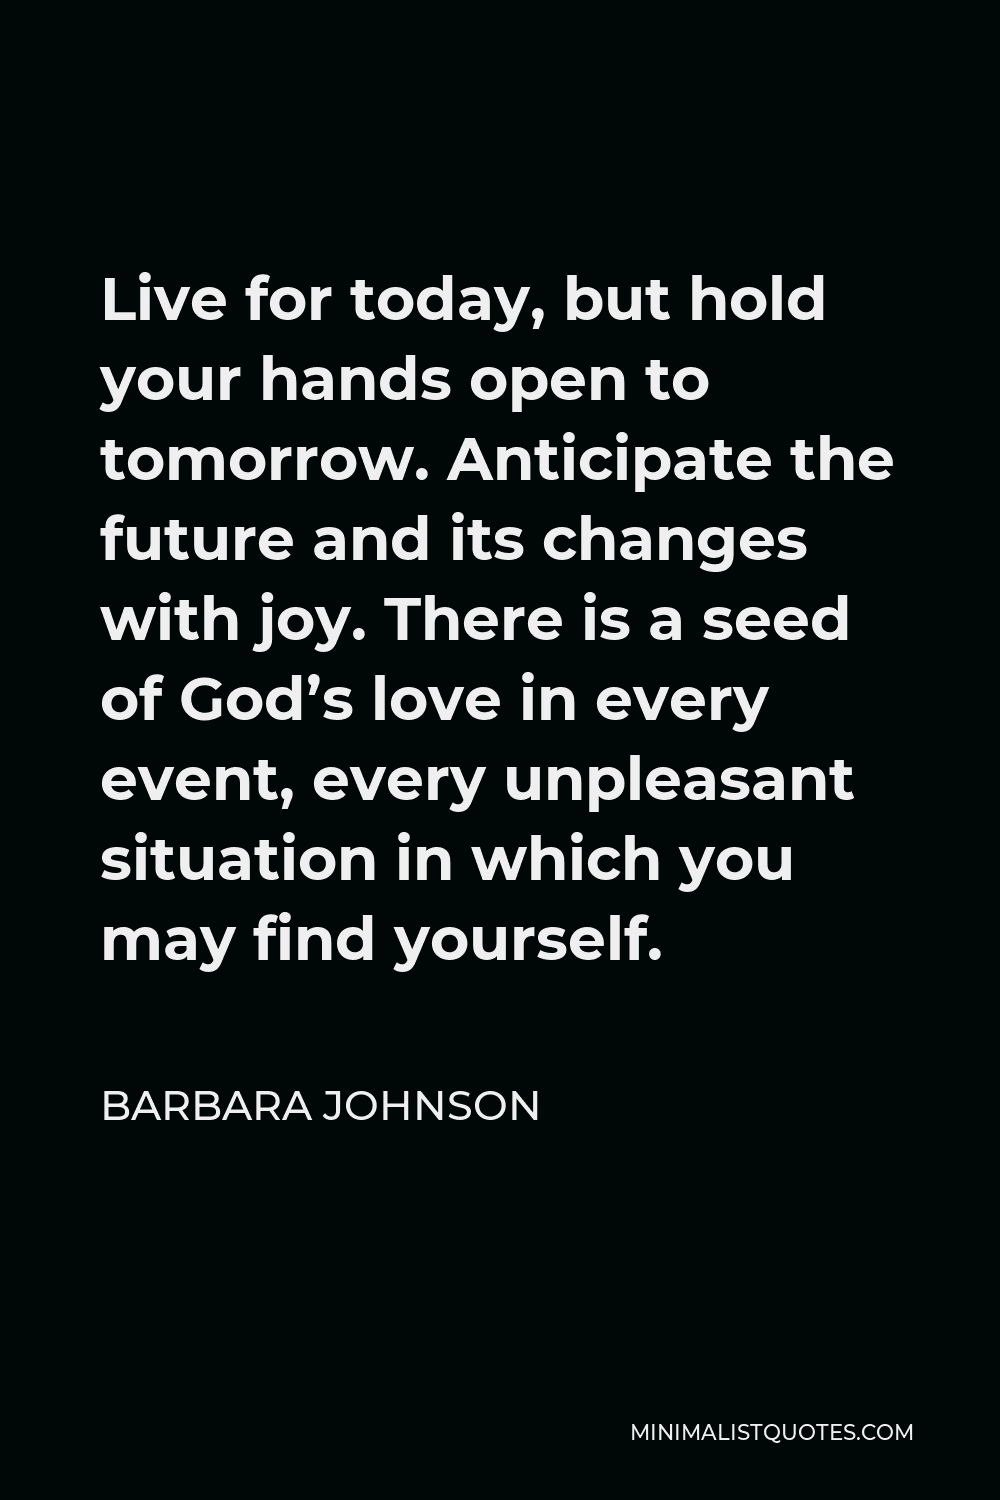 Barbara Johnson Quote - Live for today, but hold your hands open to tomorrow. Anticipate the future and its changes with joy. There is a seed of God’s love in every event, every unpleasant situation in which you may find yourself.